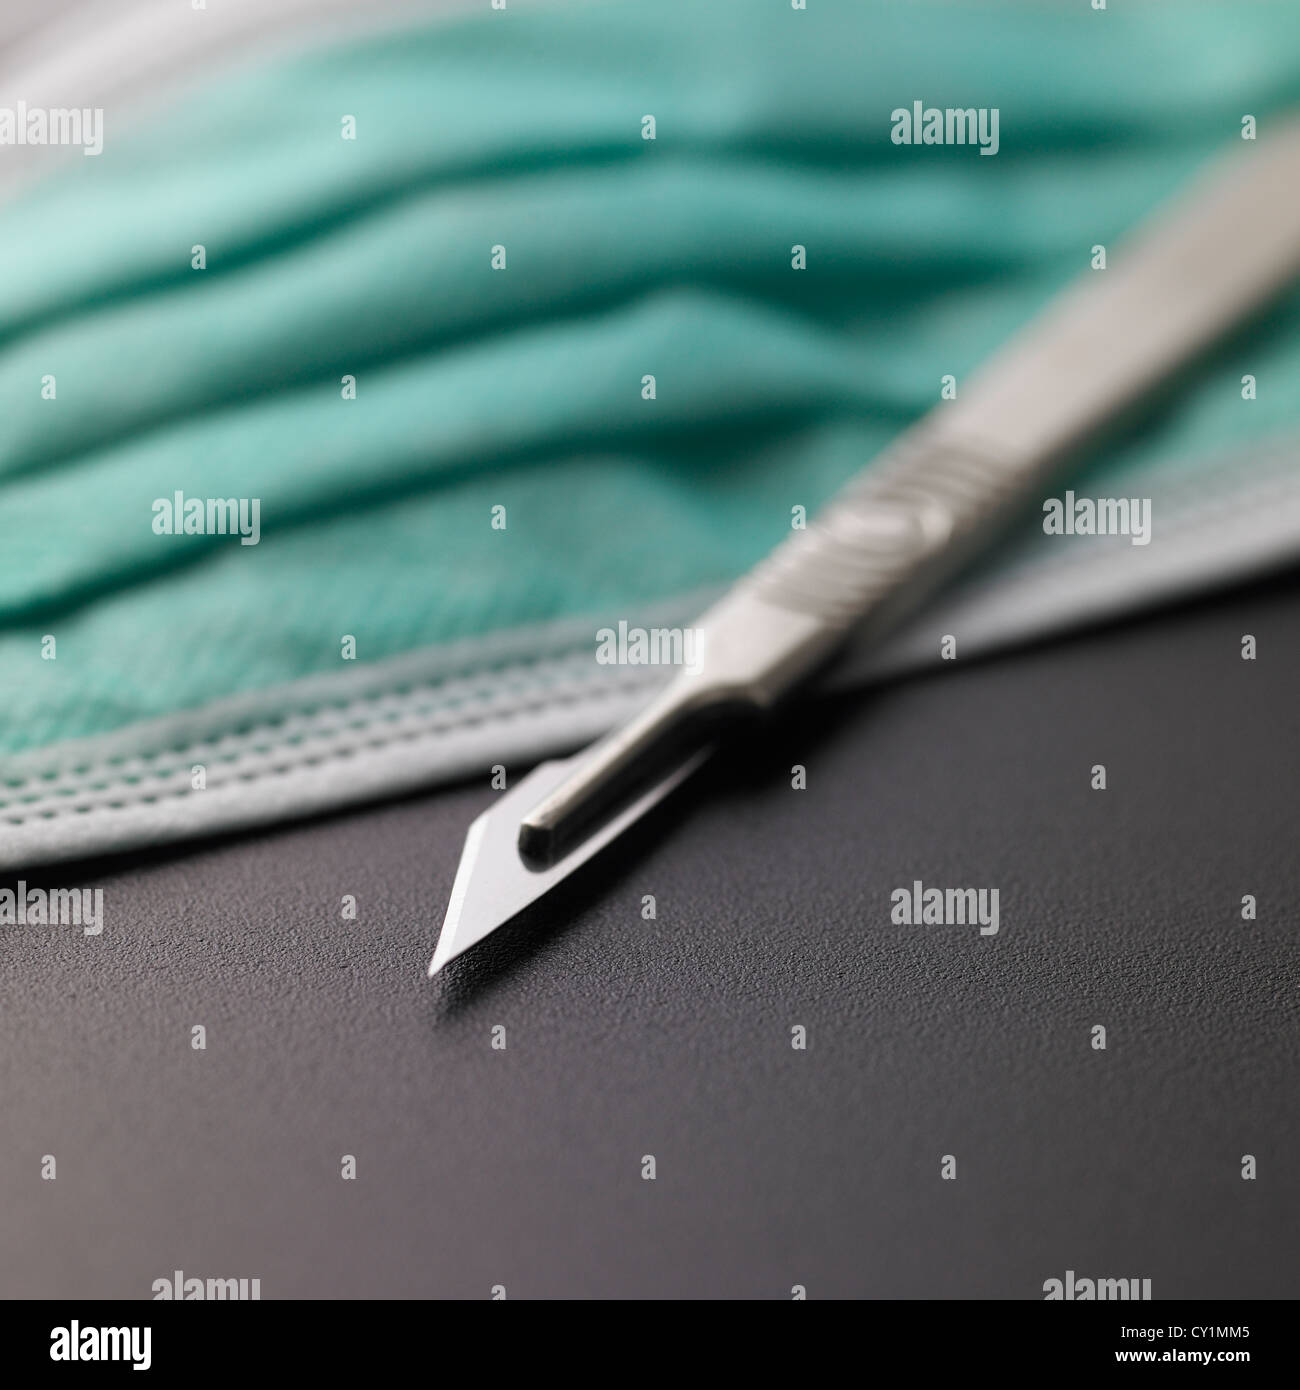 Surgical scalpel closeup above protective medical face mask on metallic grey background Stock Photo